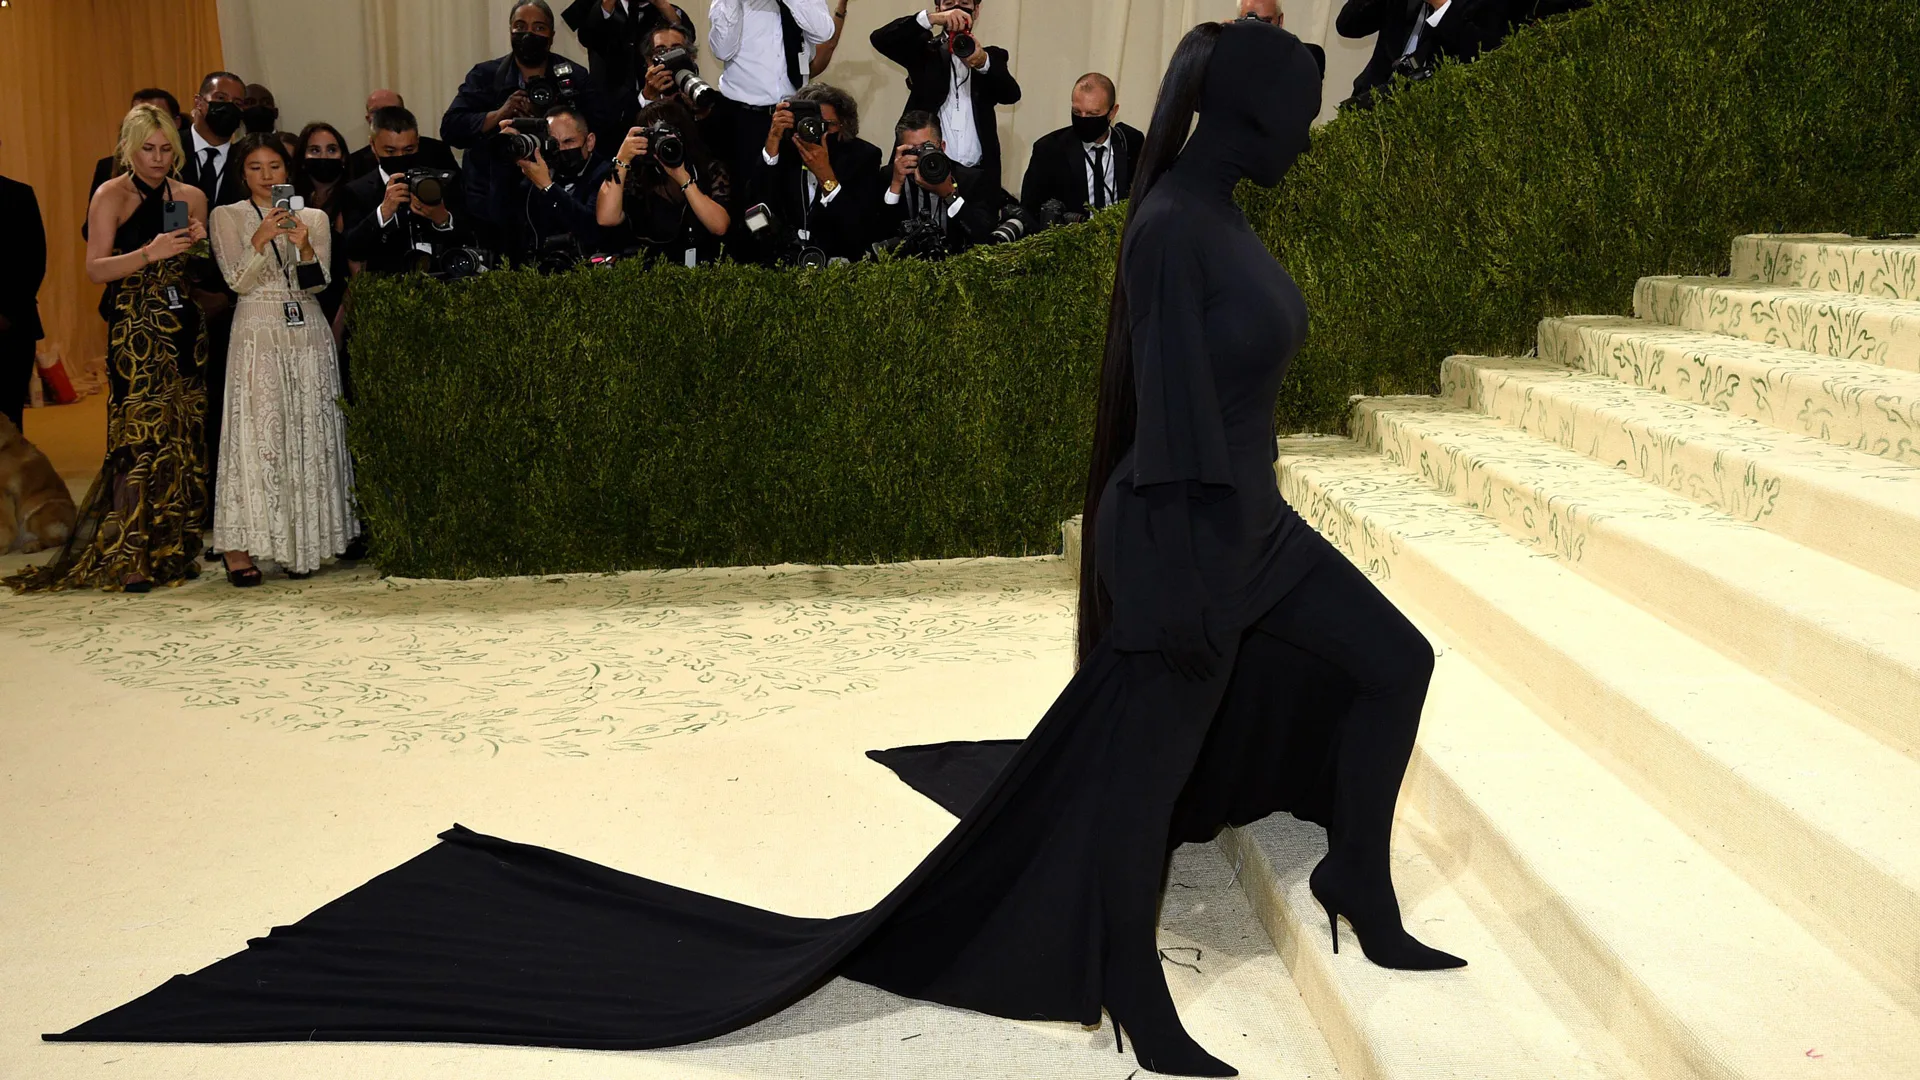 A photo of Kim Kardashian in a full body black outfit by Balengia at the Met Gala on the steps walking up with the press taking photos behind her